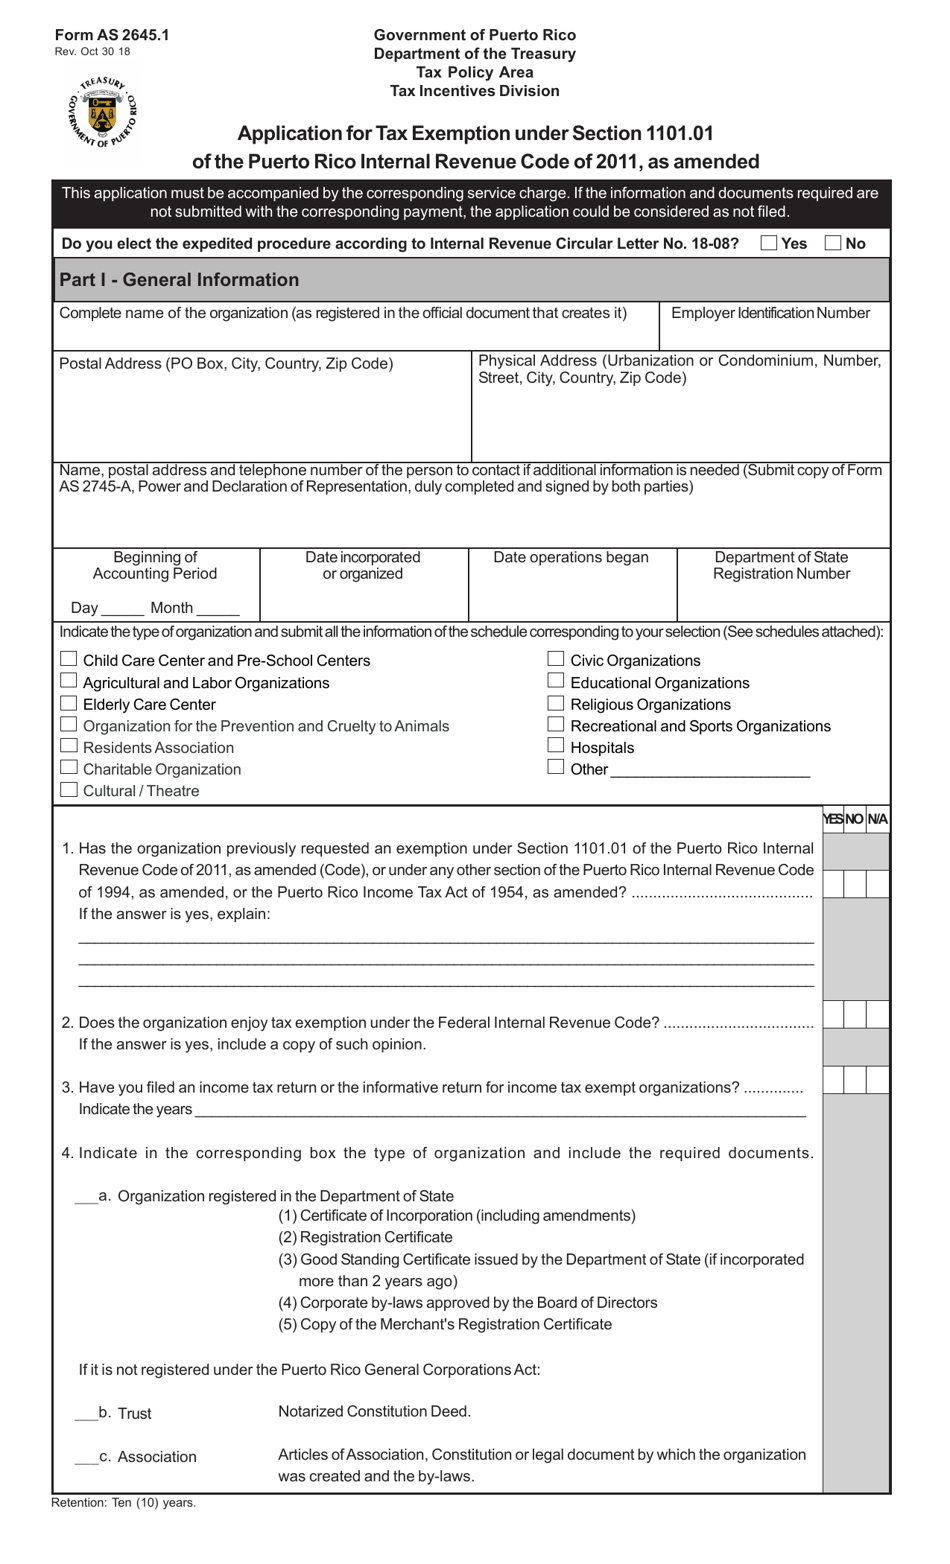 Form AS2645.1 Application for Tax Exemption Under Section 1101.01 of the Puerto Rico Internal Revenue Code of 2011, as Amended - Puerto Rico, Page 1